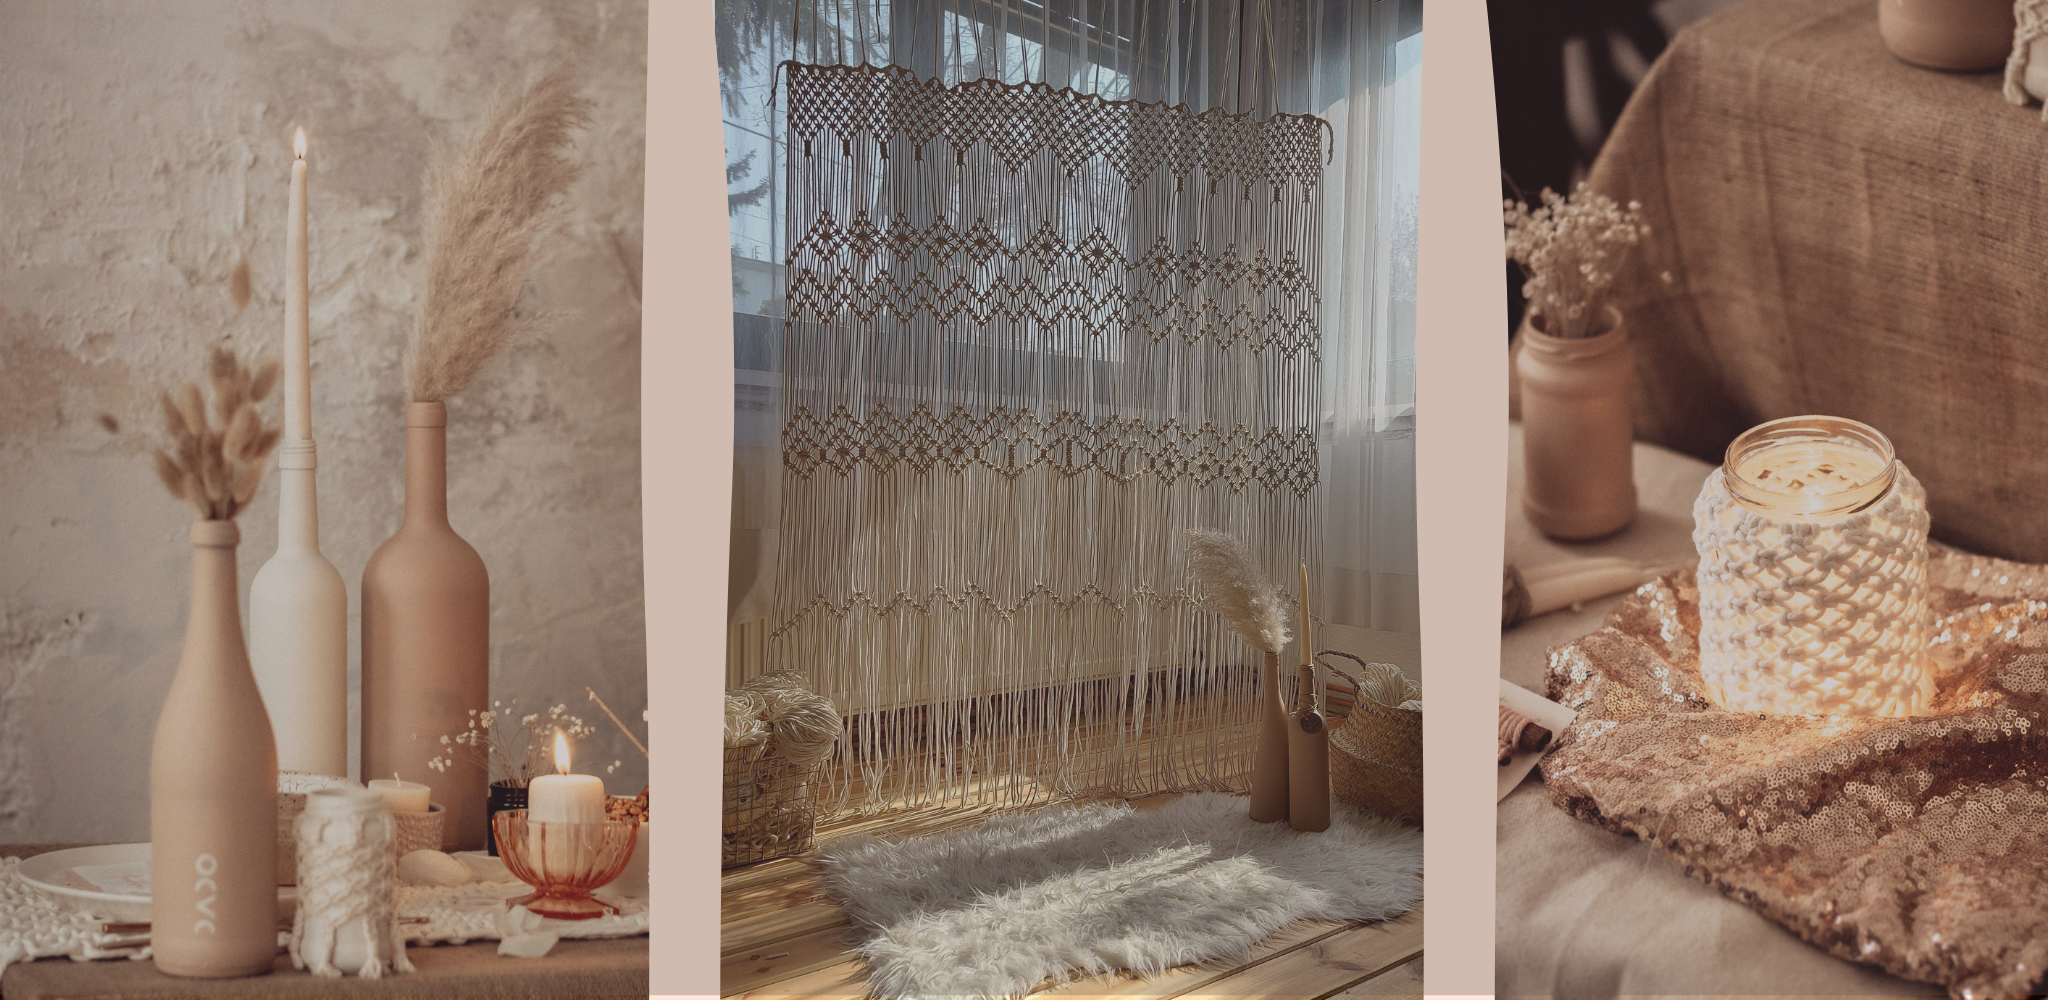 curtains • planthangers • bottles • lamps • wall & table decors